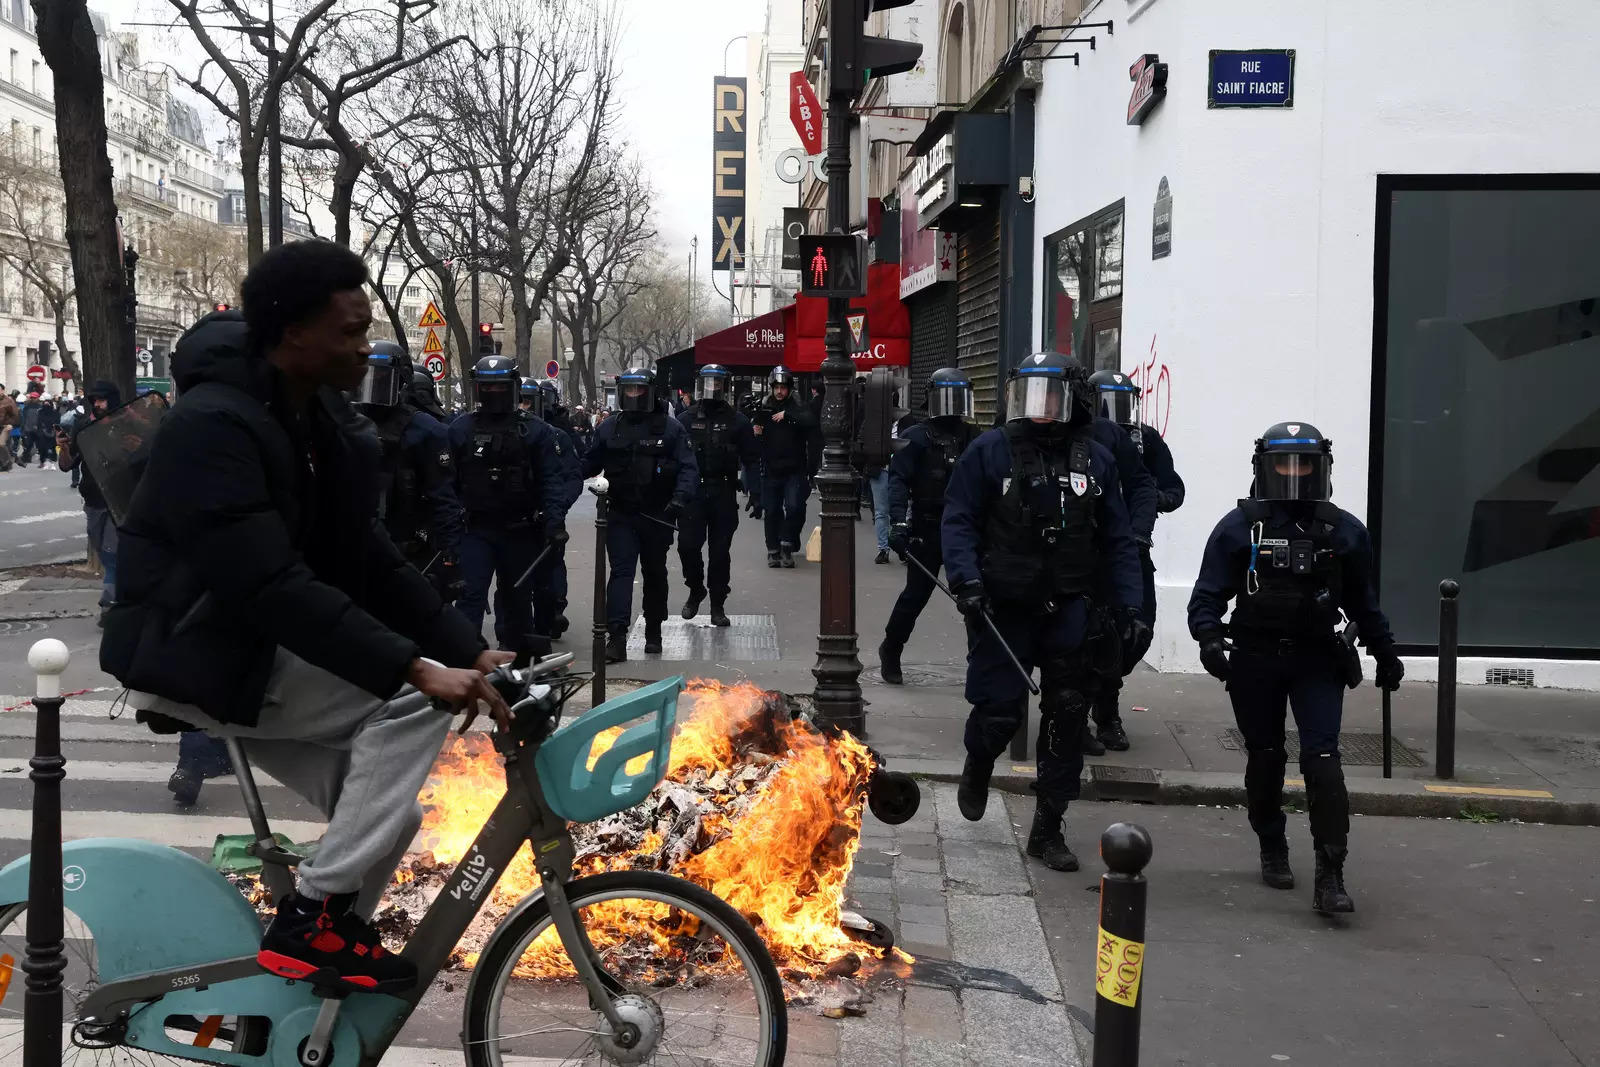 Several injured as clashes break out between police and protesters in France